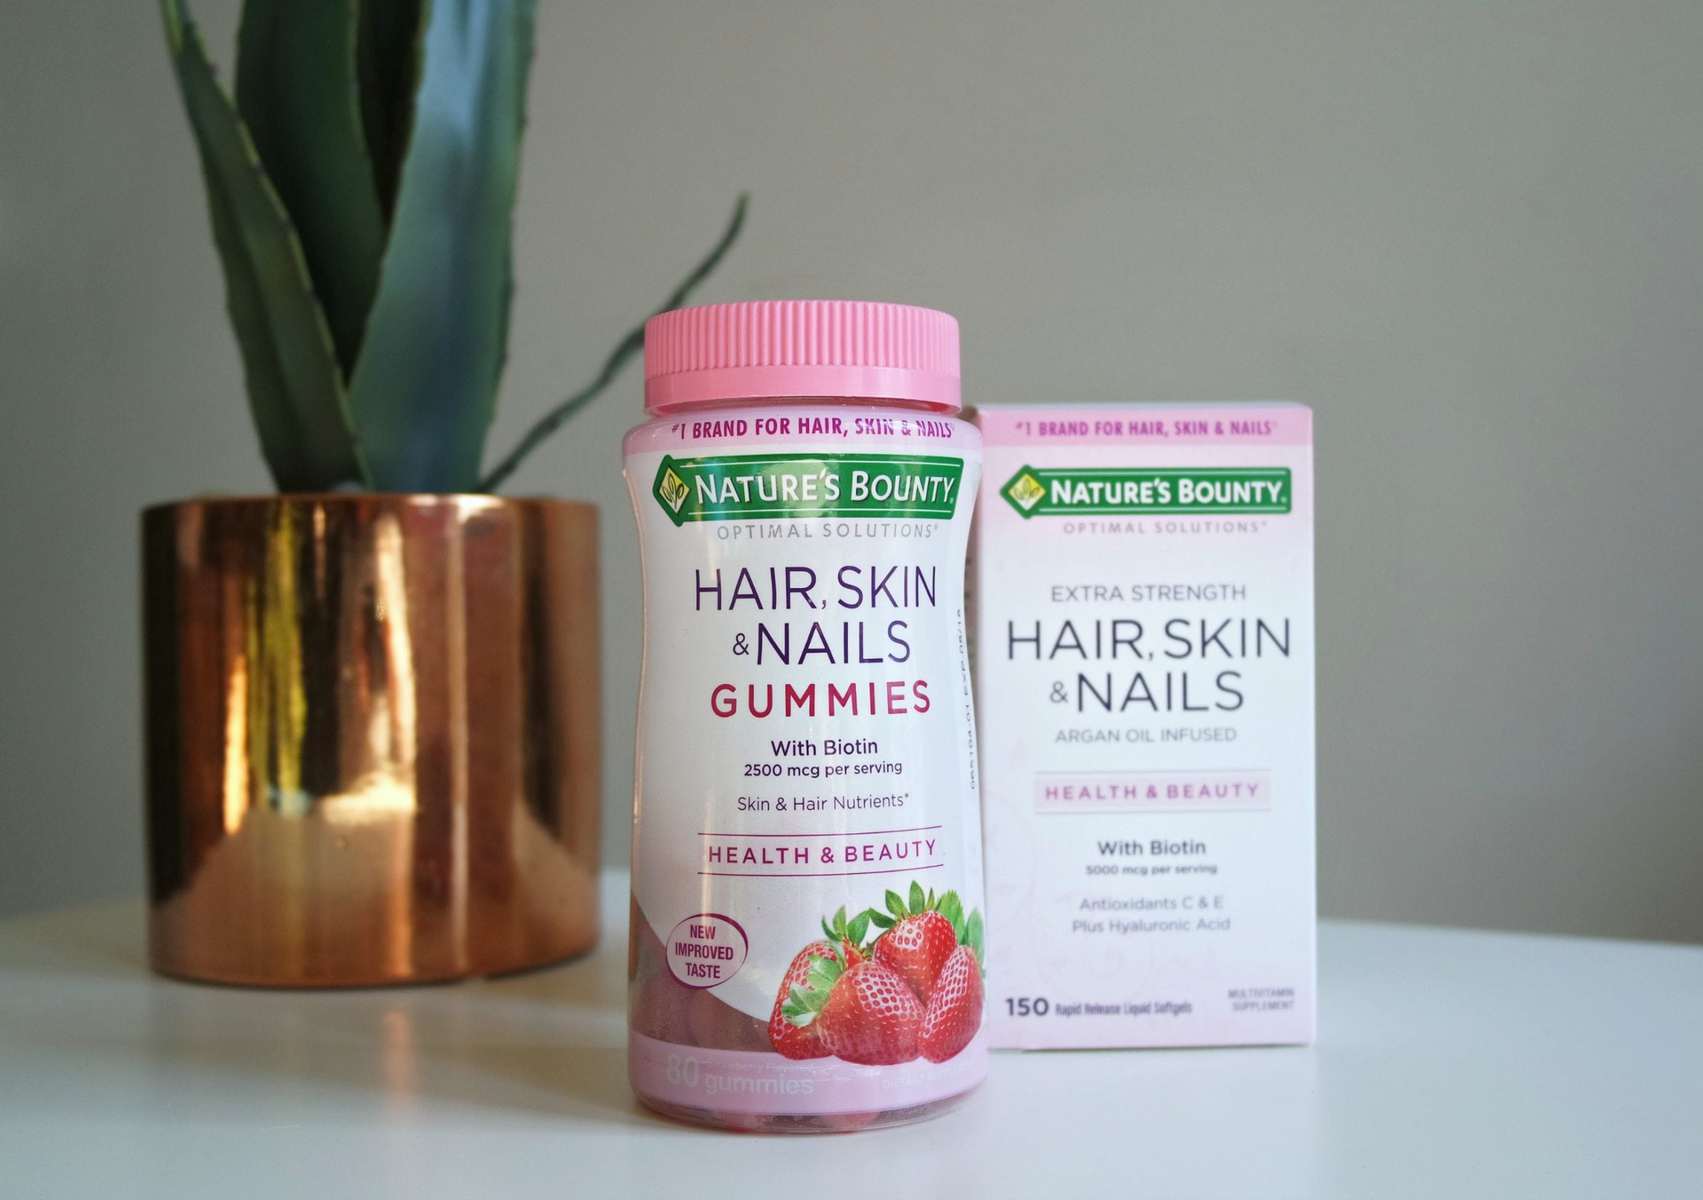 Nature's Bounty Gummies for Hair and Nails Review - Wardrobe Oxygen (sponsored)